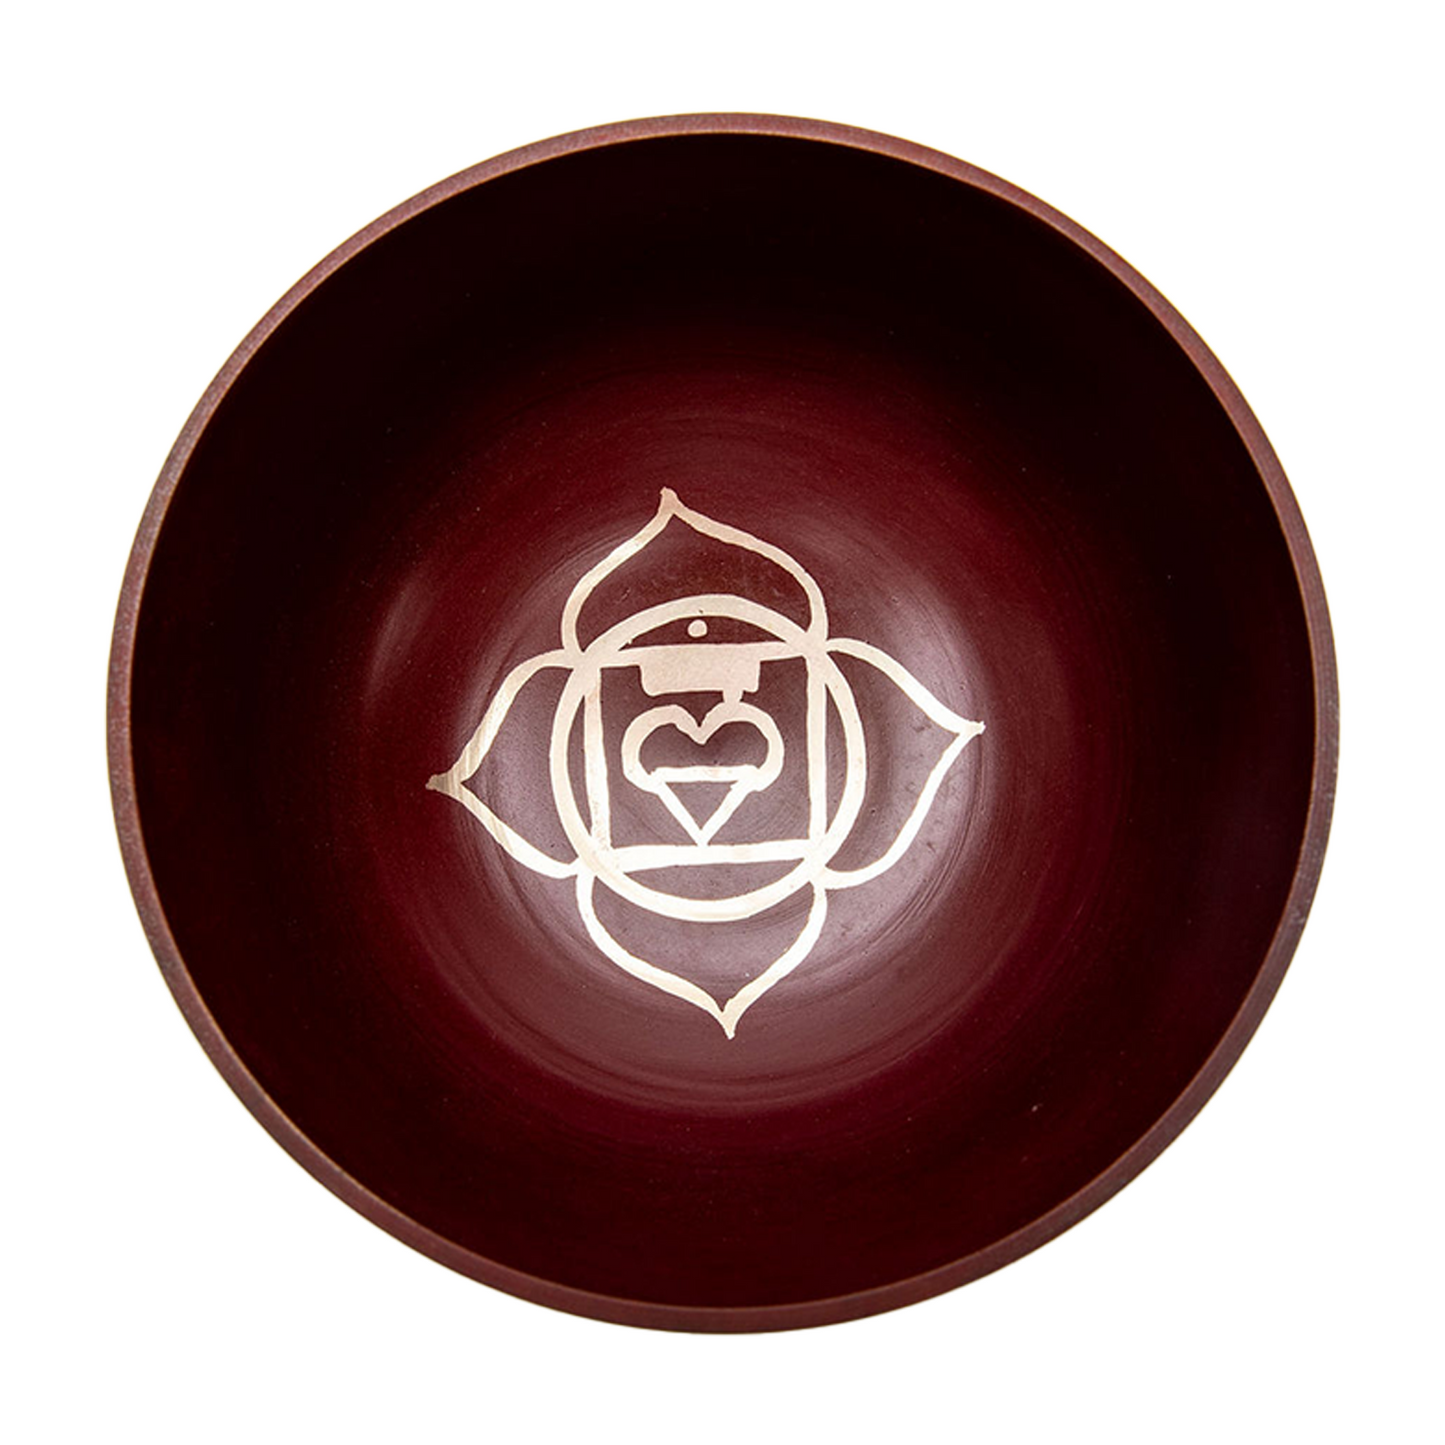 Inside view of the red chakra (root chakra) bowl on a white backdrop.